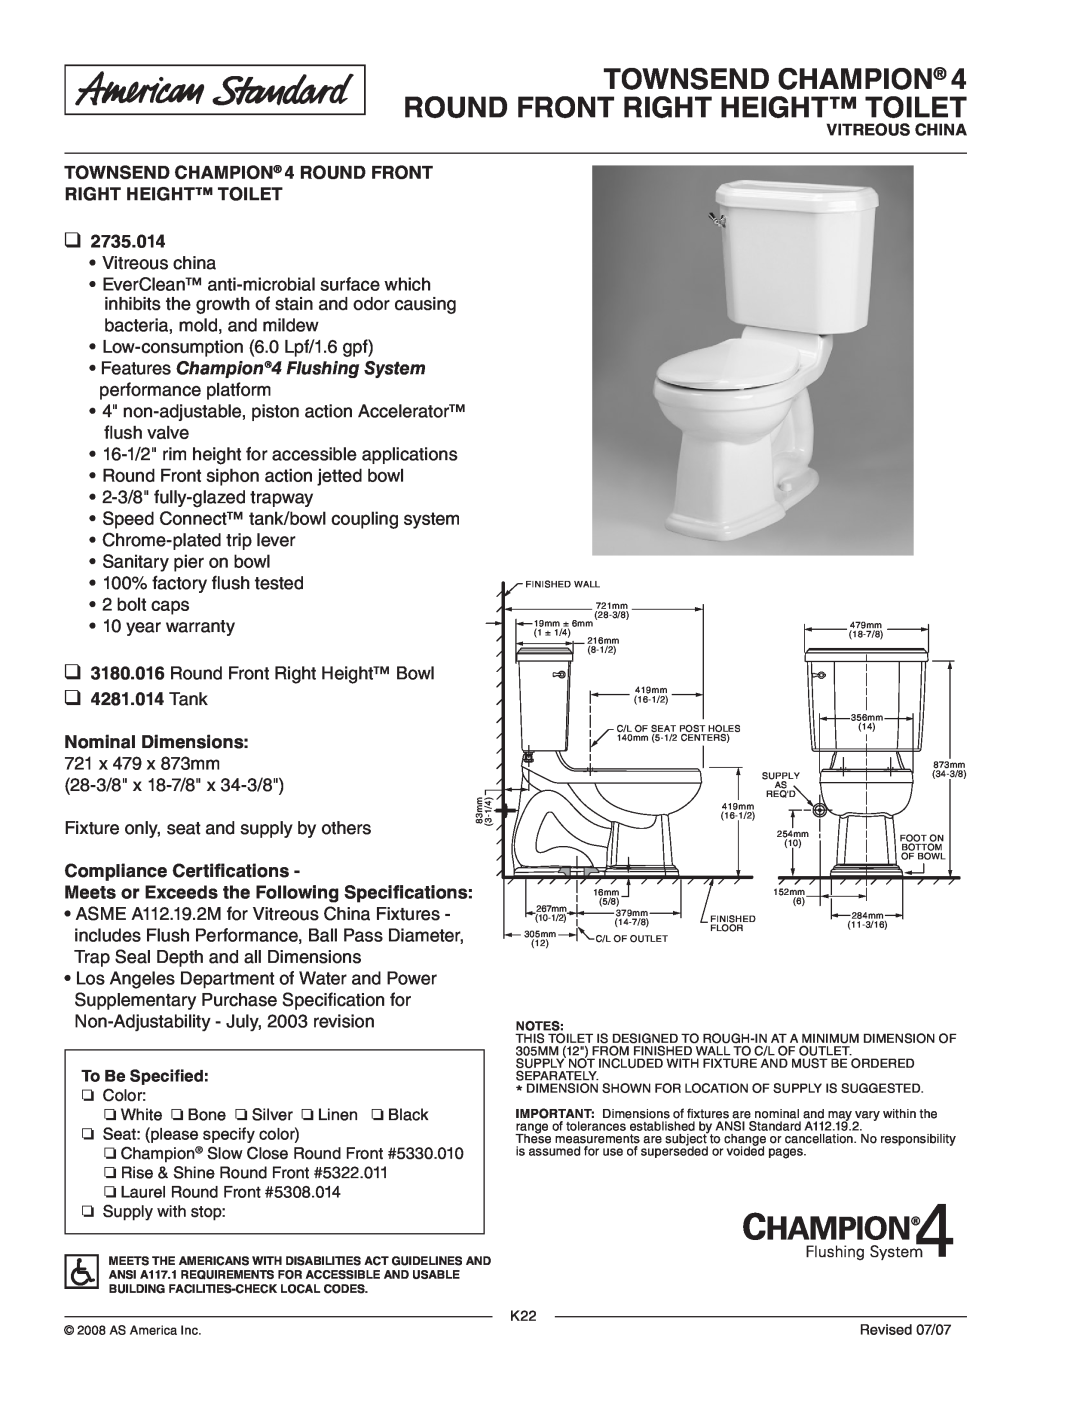 American Standard 2735.014, 3180.016 dimensions Tank Nominal Dimensions, Compliance Certifications 